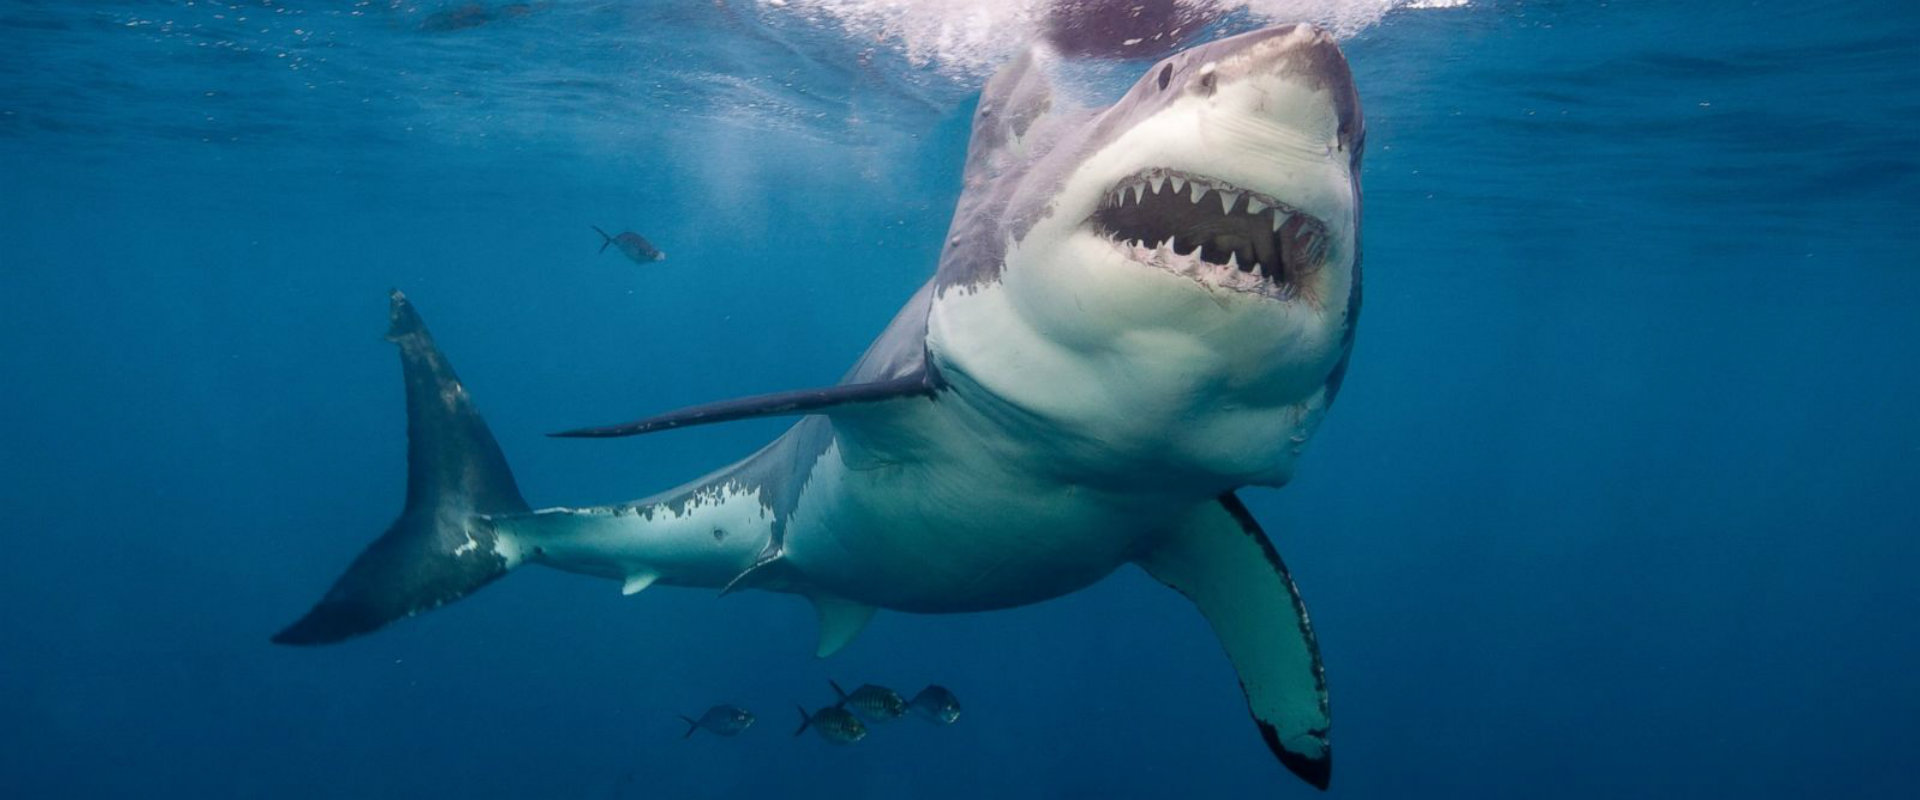 Great White Shark HD Wallpapers Shark Pictures Images 1920x800